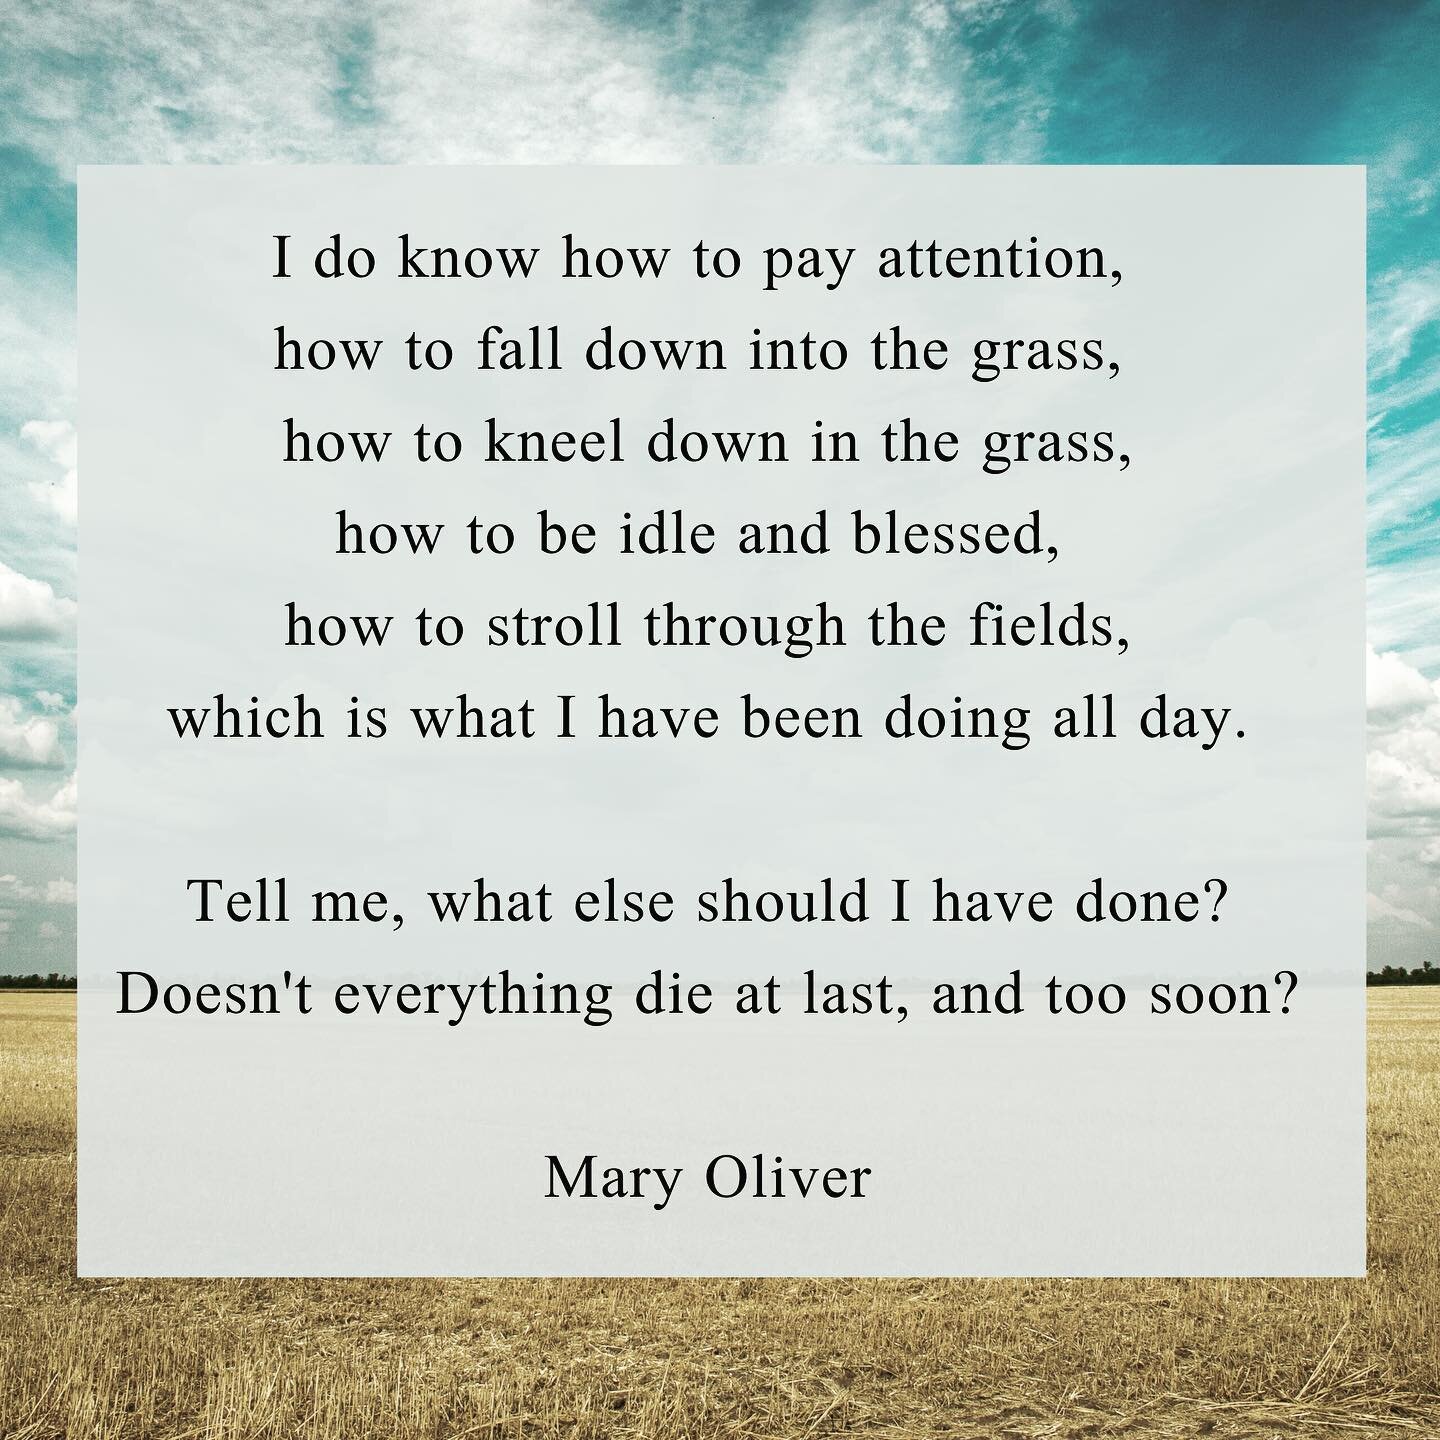 &ldquo;I do know how to be idle and blessed&rdquo;
-This may not be the most famous excerpt from Mary Oliver&lsquo;s beloved poem, but it is my favorite. It comes from a place of contentment rather than craving/striving/grasping.
.
Contentment is a p